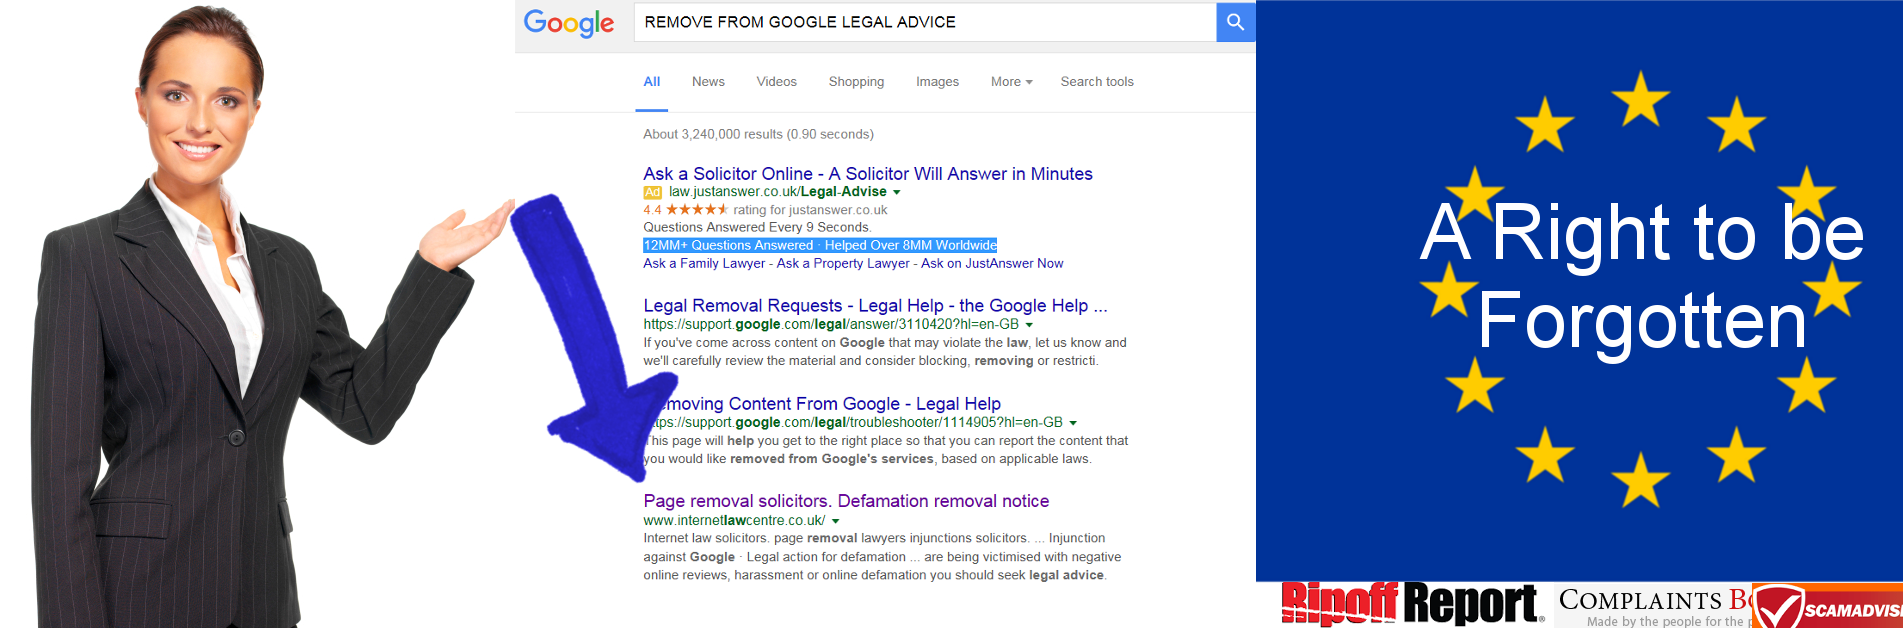 remove_google_legal_advice.png